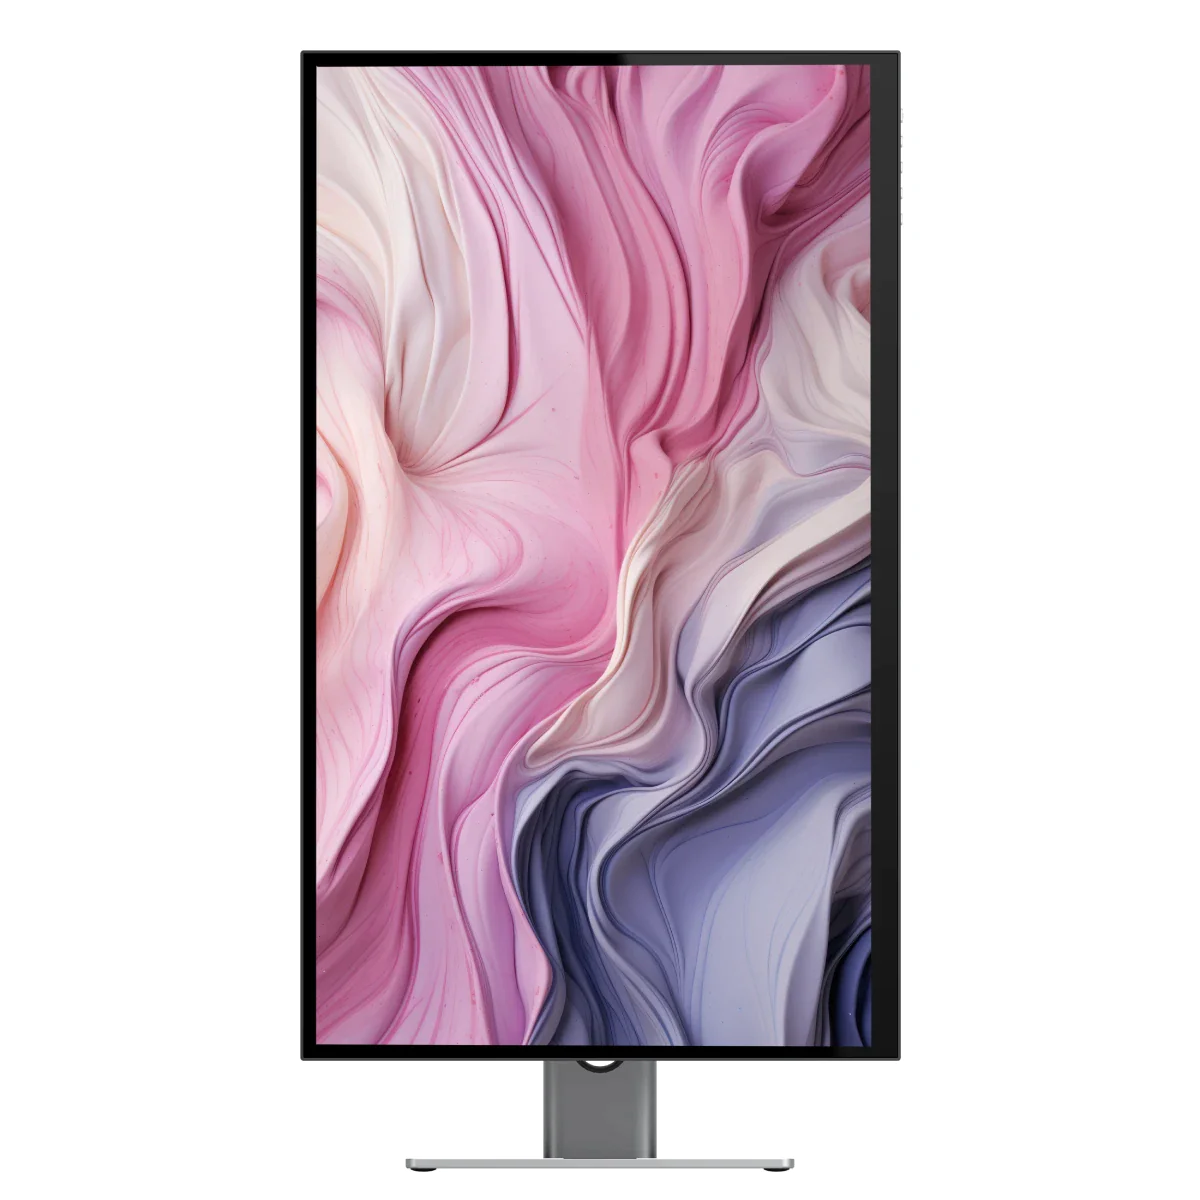 CLARITY 27” UHD 4K Monitor + Clarity Pro Touch 27" UHD 4K Monitor with 65W PD, Webcam and Touchscreen + Thunderbolt 4 BLAZE Docking Station